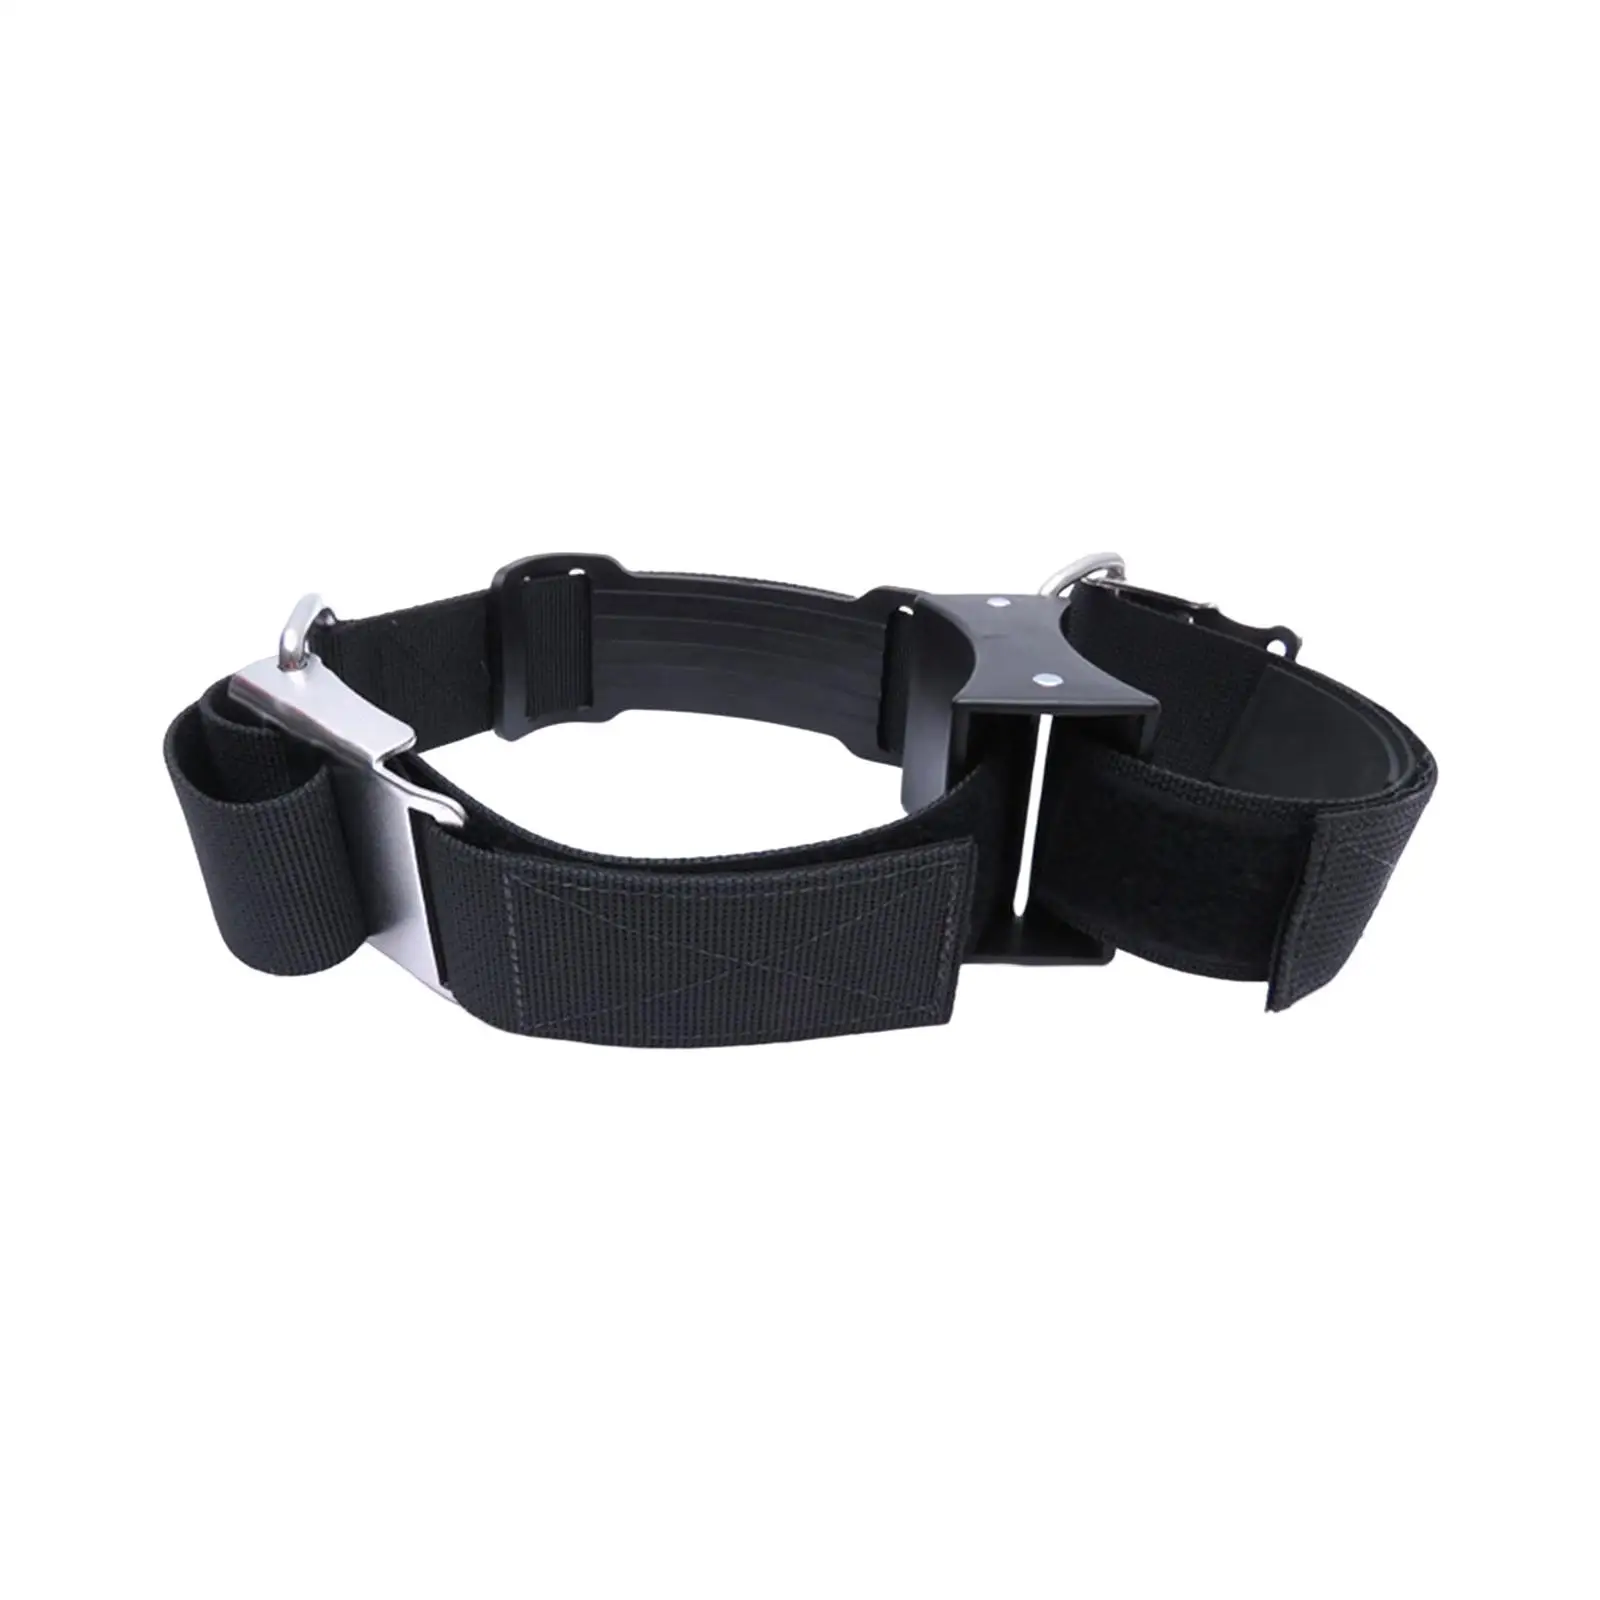 Premium Scuba Diving Tank Band Cylinder Carrying Strap, Adjustable Tank Carrier